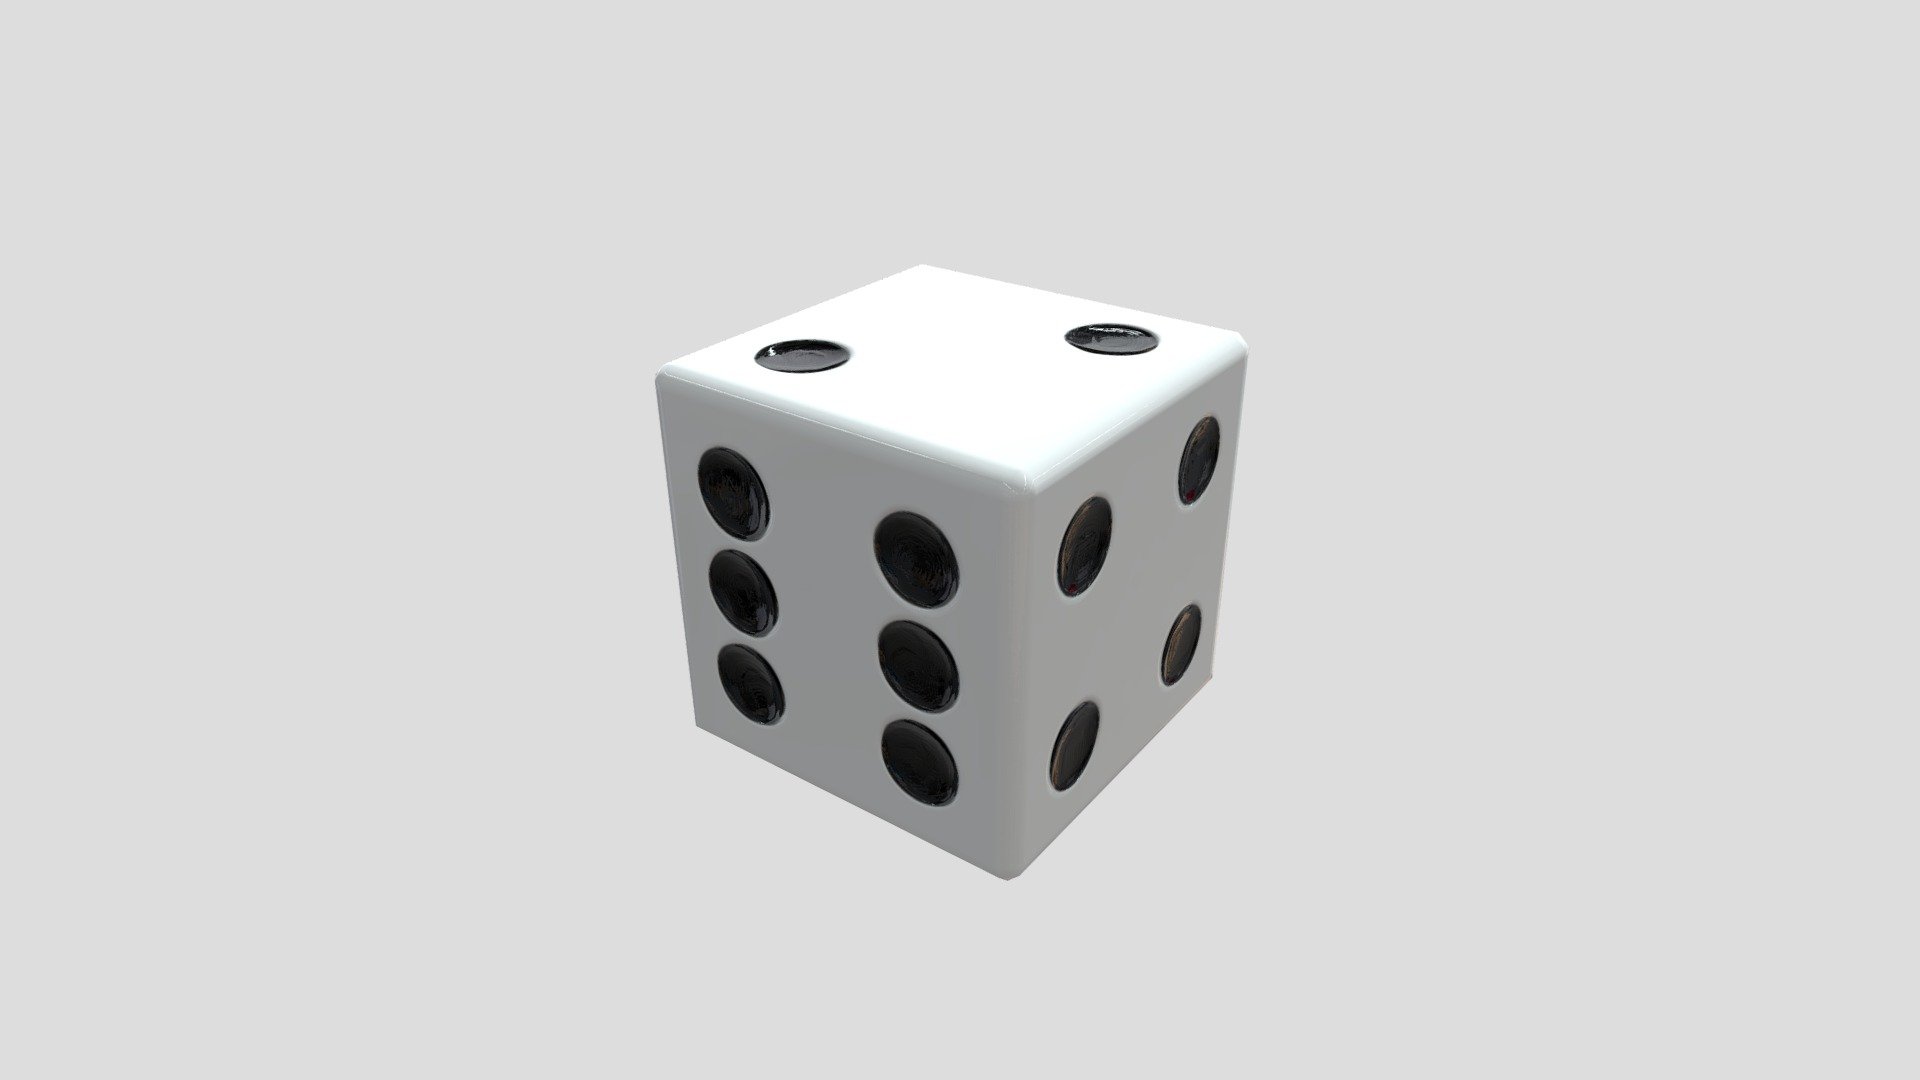 Roll the dice traveler, try your luck.
Before you the historically correct numbering of the faces. Cube - A common die. The sum of the numbers on opposite faces is 7.

These wonderful bones are only 44 polygons.
Game Ready model with excellent detail.
5 textures in a box.
2k and 512 resolution textures .
One of the models of the set 

Included mesh:
Lowpoly
Highpoly

2k resolution textures include:
Albedo
Height
AO
Metallic
Normal
Roughness

Included files:
Dice_d6.stl (printable)
Dice_d6.blend
Dice_d6.fbx
Dice_d6.obj
Dice_d6.mtl

Polygons - 44 Vertices - 24
If you have any personal wishes about the model, you can contact me by:
e-mail: lerrmar@mail.ru
Instagram: @lerrmar
You can also leave your wishes in the comments 3d model